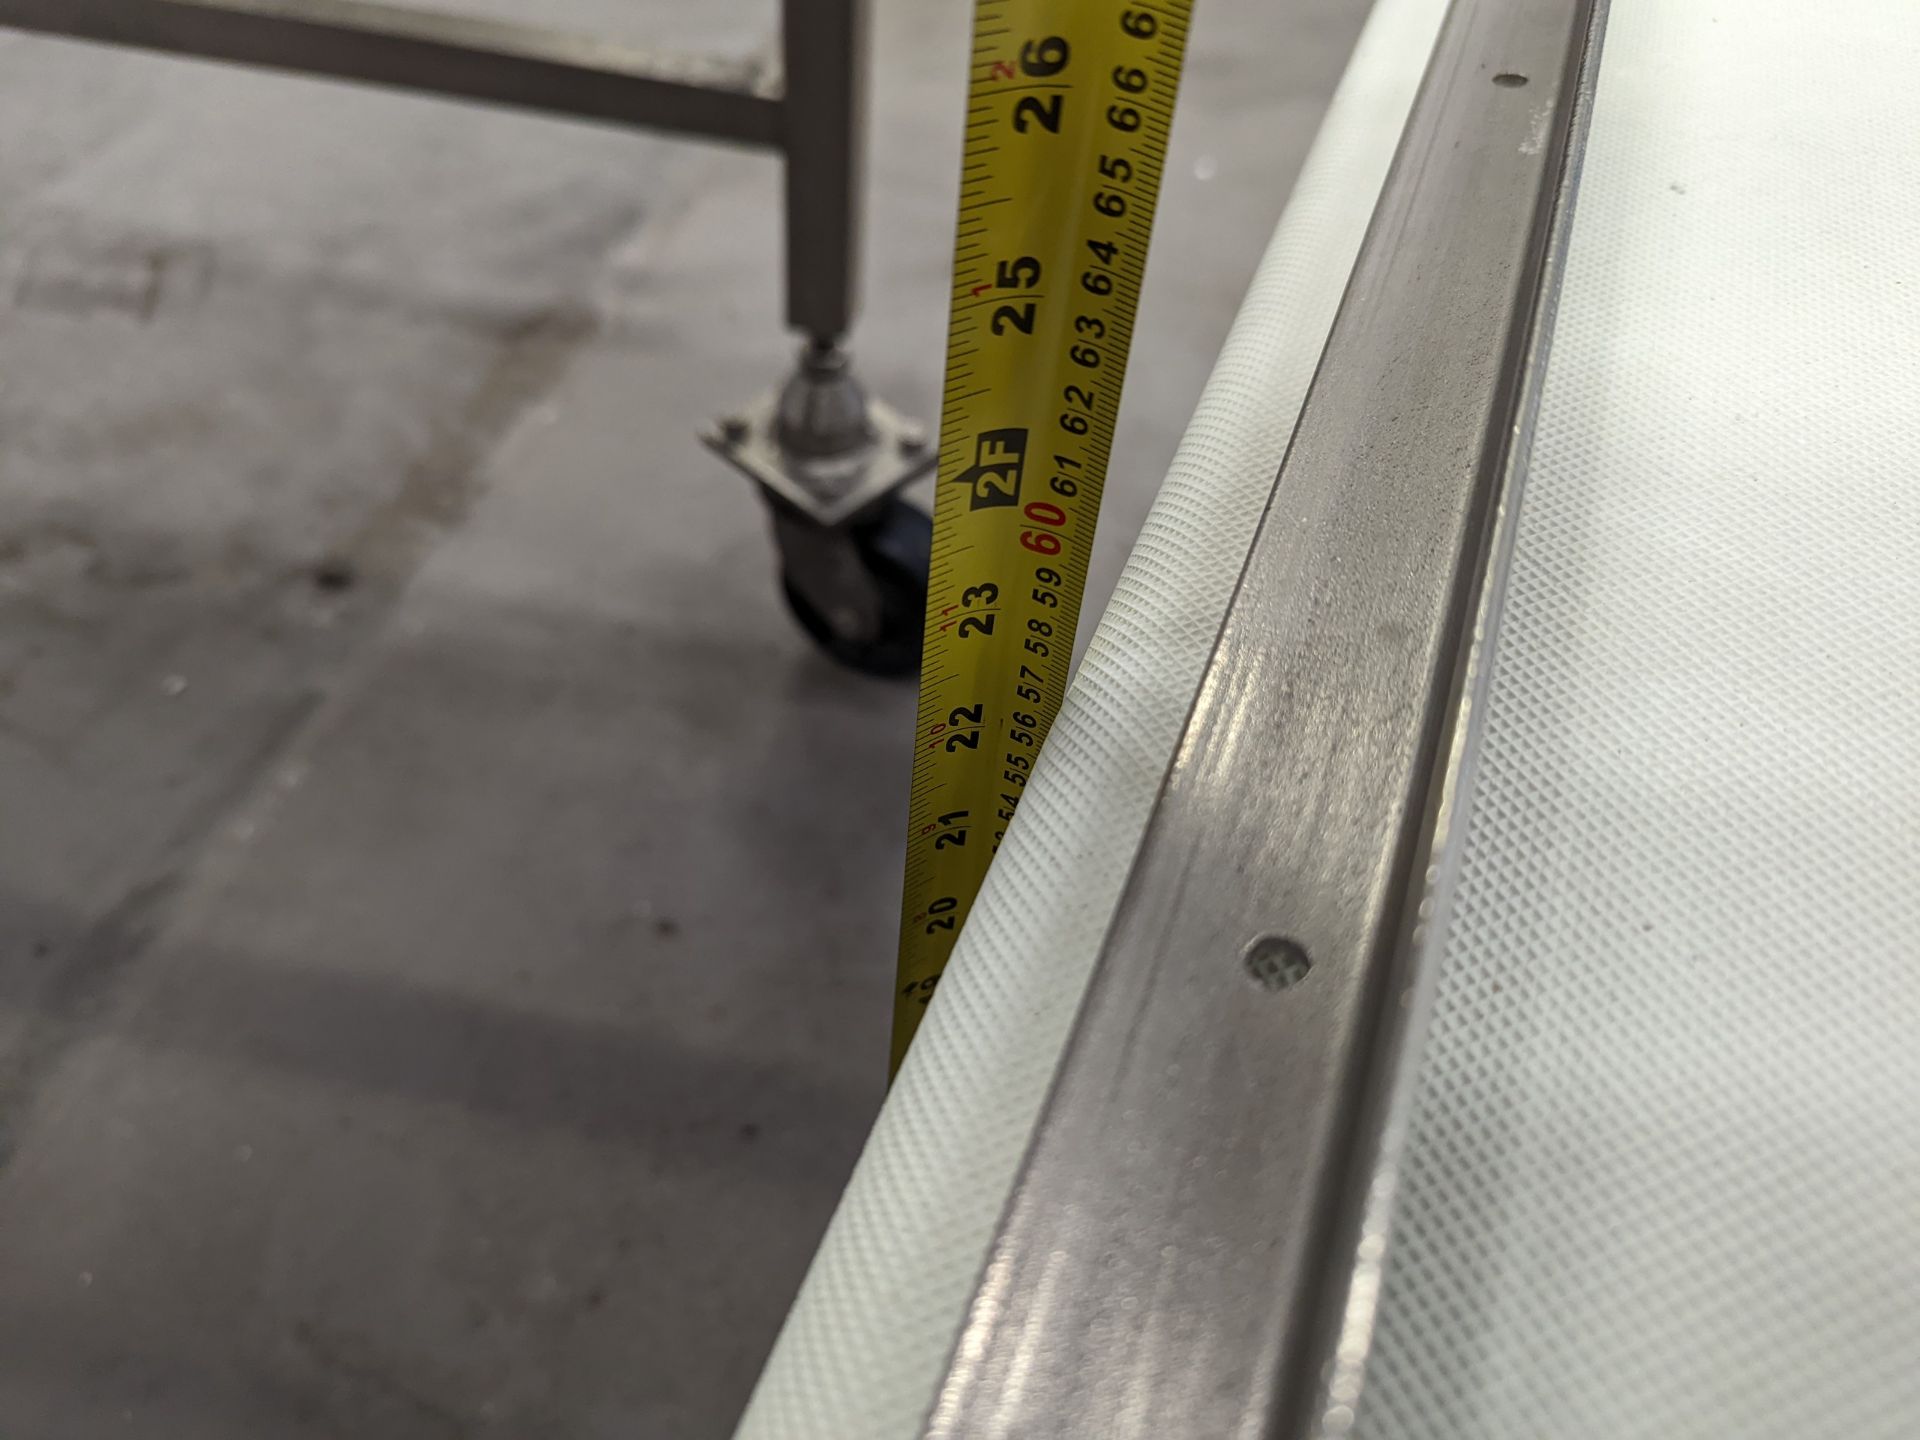 Conveyor, White Food Grade Belt, Belt 191"L 31"W, First 65" is inclined, 24" infeed height 34" - Image 20 of 21